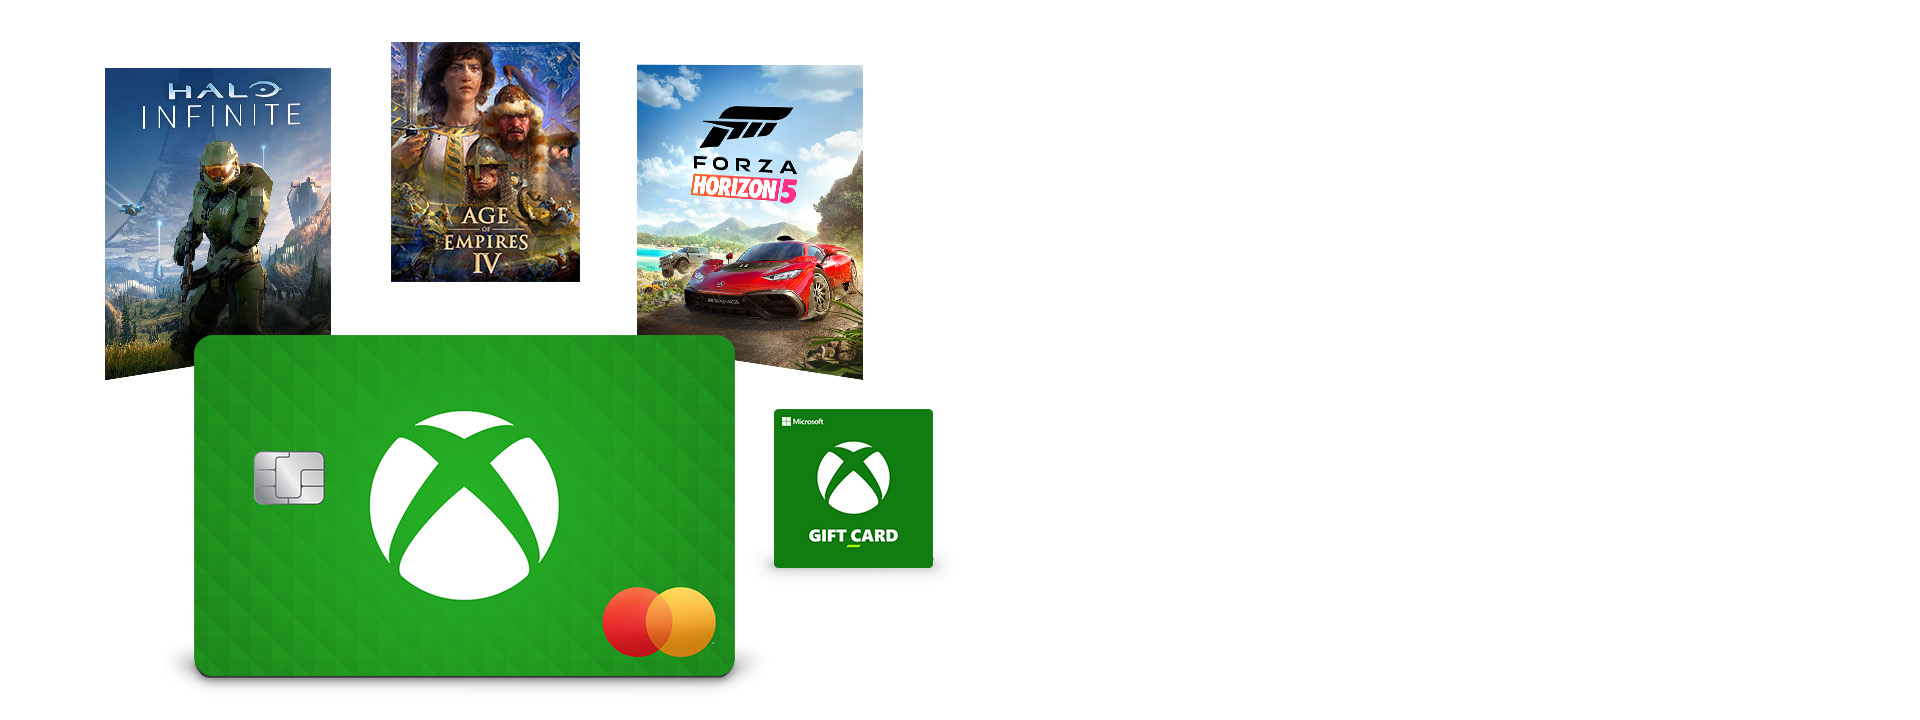 How To Buy Xbox Game Pass With Microsoft Account Balance?